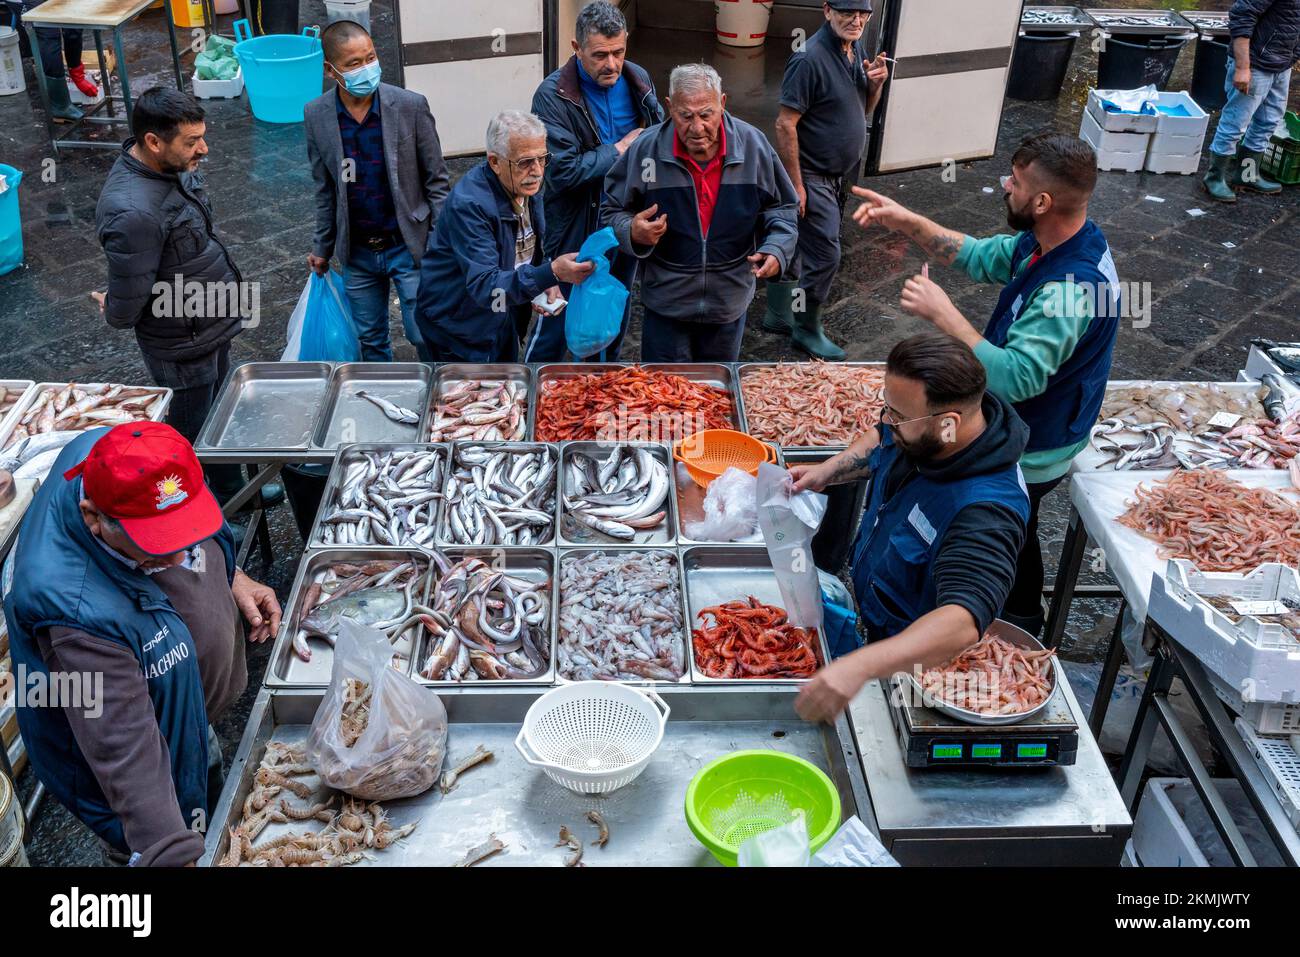 Fresh Fish/Seafood For Sale At The Daily Fish Market, Catania, Sicily, Italy. Stock Photo